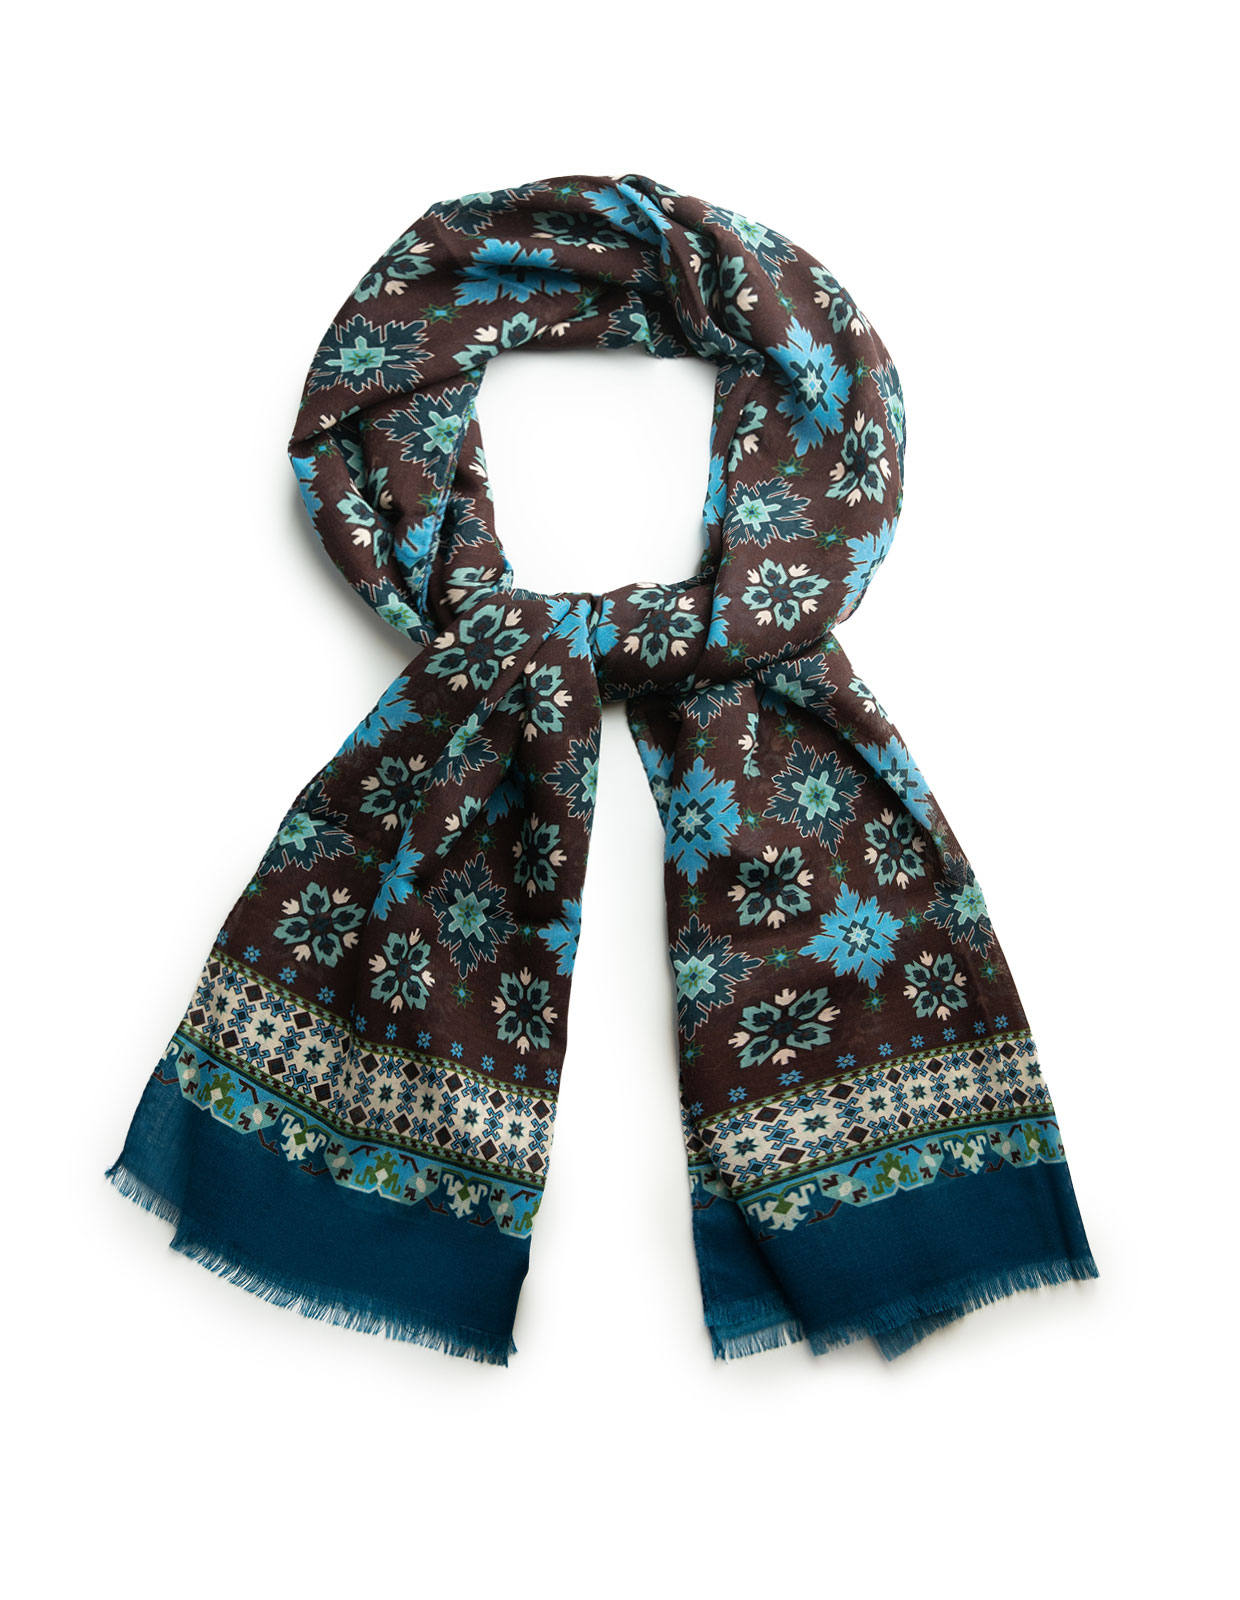 Printed Scarf Wool Cashmere Brown/Turquoise